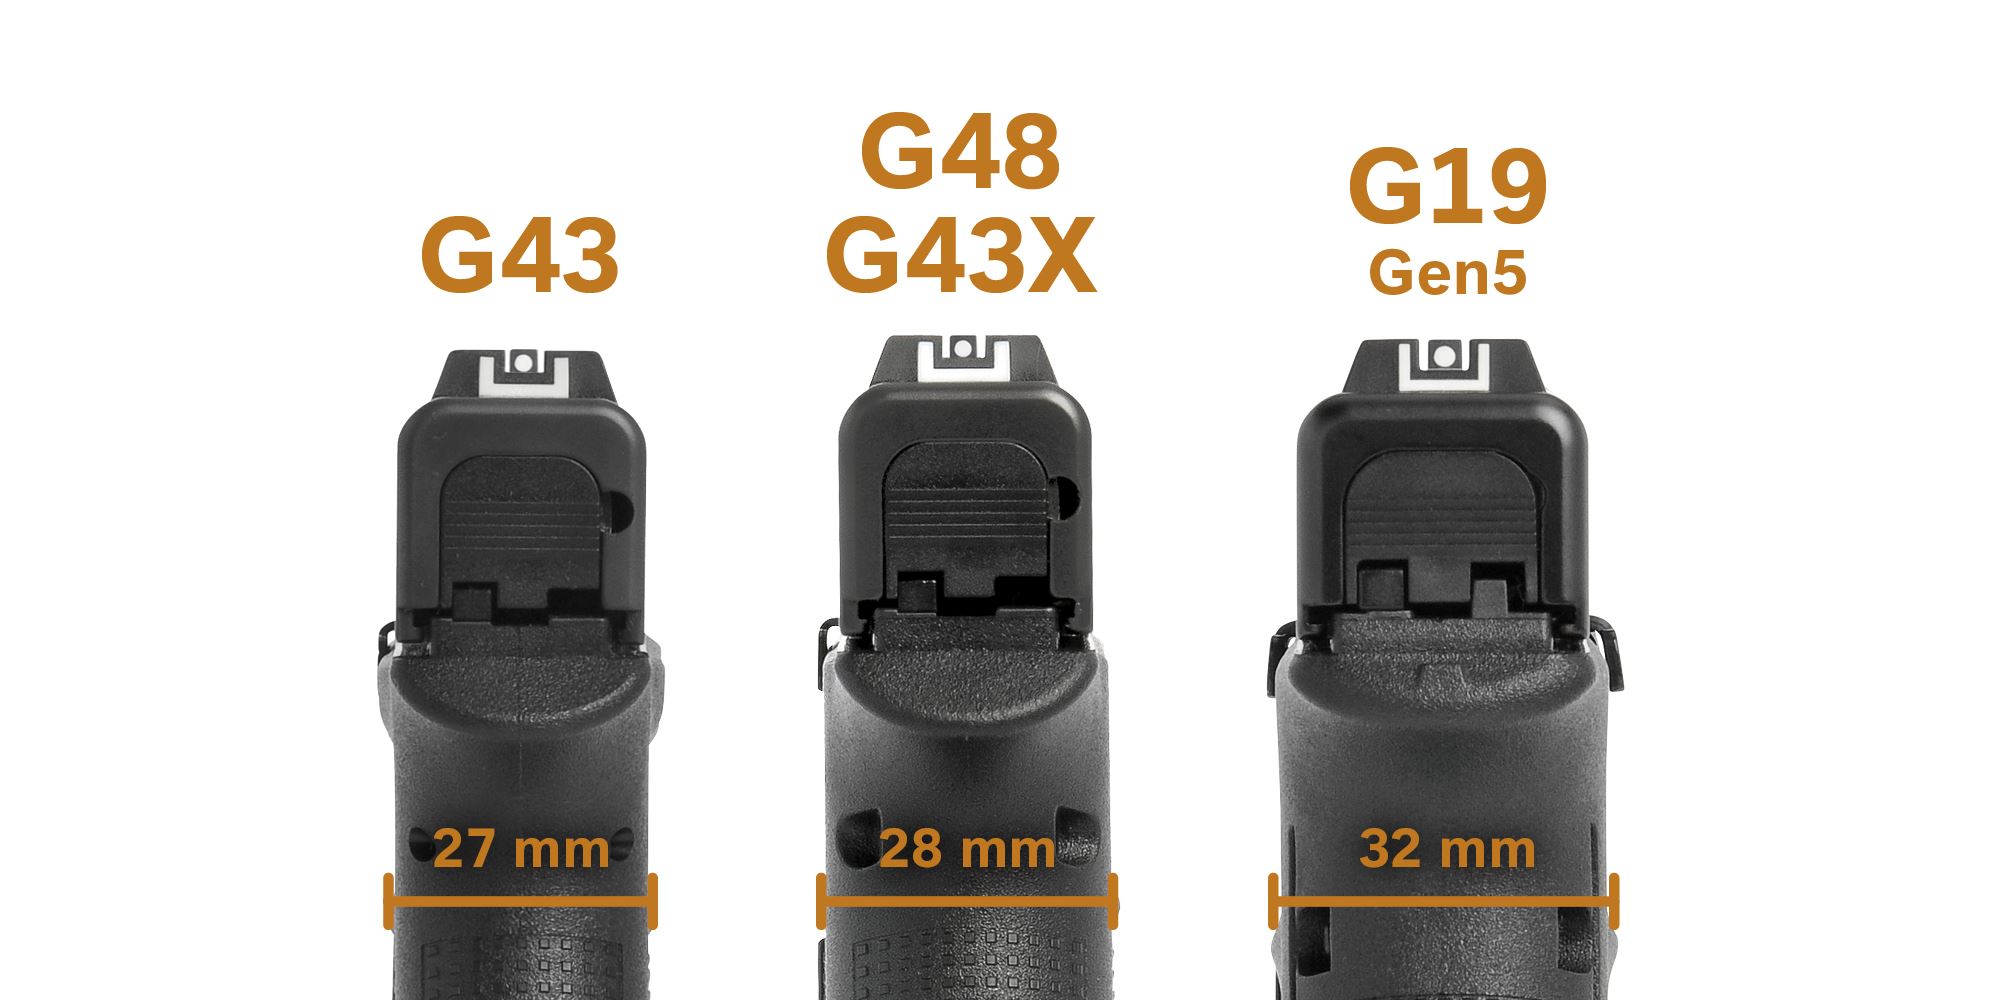 Backside size of G43, G48, G43X and G19 Gen5.